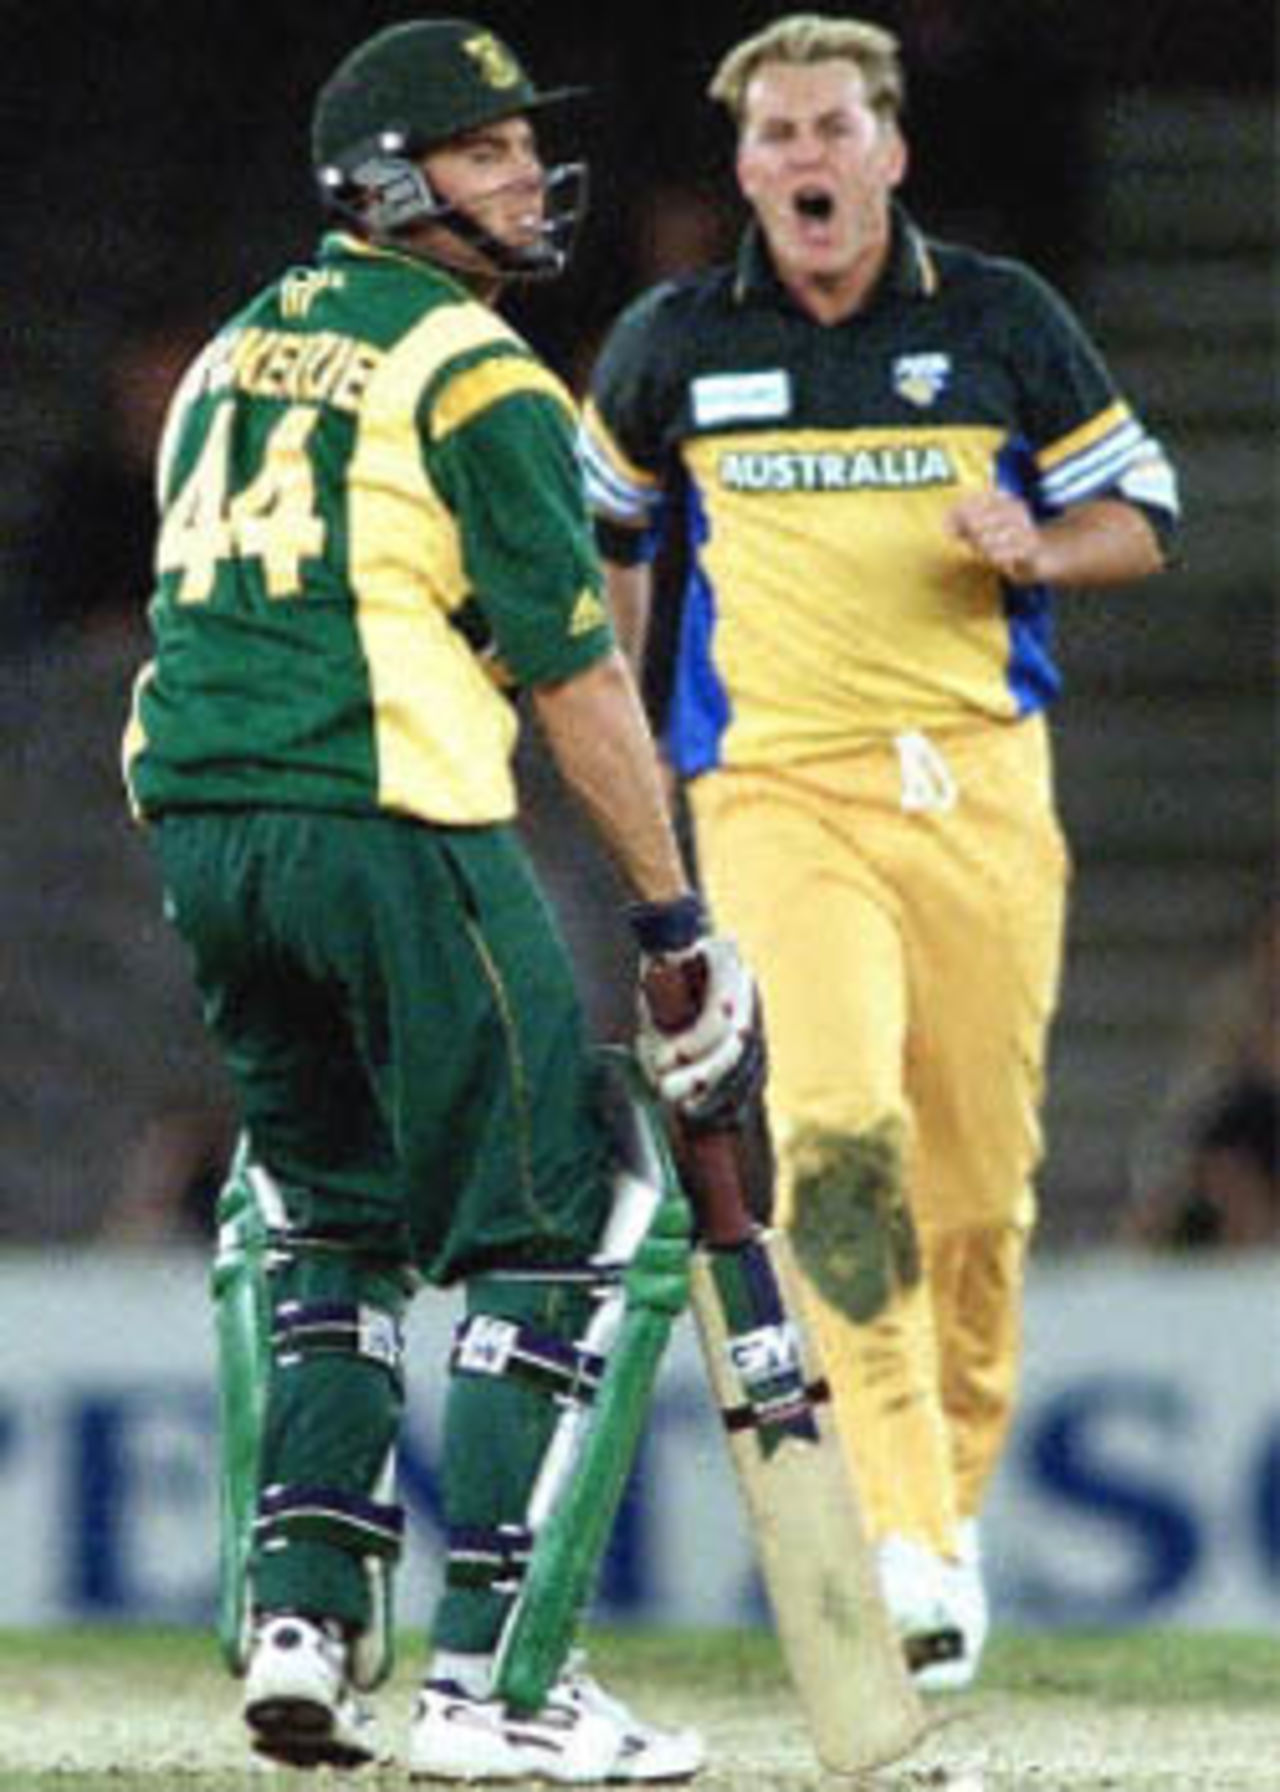 Australian bowler Shane Lee (R) gives South Africa's Neil McKenzie (L) a send off after bowling him in the first one day cricket match in history to be played under a closed roof at Colonial Stadium as Australia takes on South Africa in Melbourne. Being played in the middle of winter in Melbourne, Australia scored 295-5 in their 50 overs and restricted South Africa to 201-7 in their 50 overs to win the match comfortably. South Africa in Australia, 2000/01, 1st One-Day International, Australia v South Africa, Colonial Stadium, Melbourne, 16 August 2000.